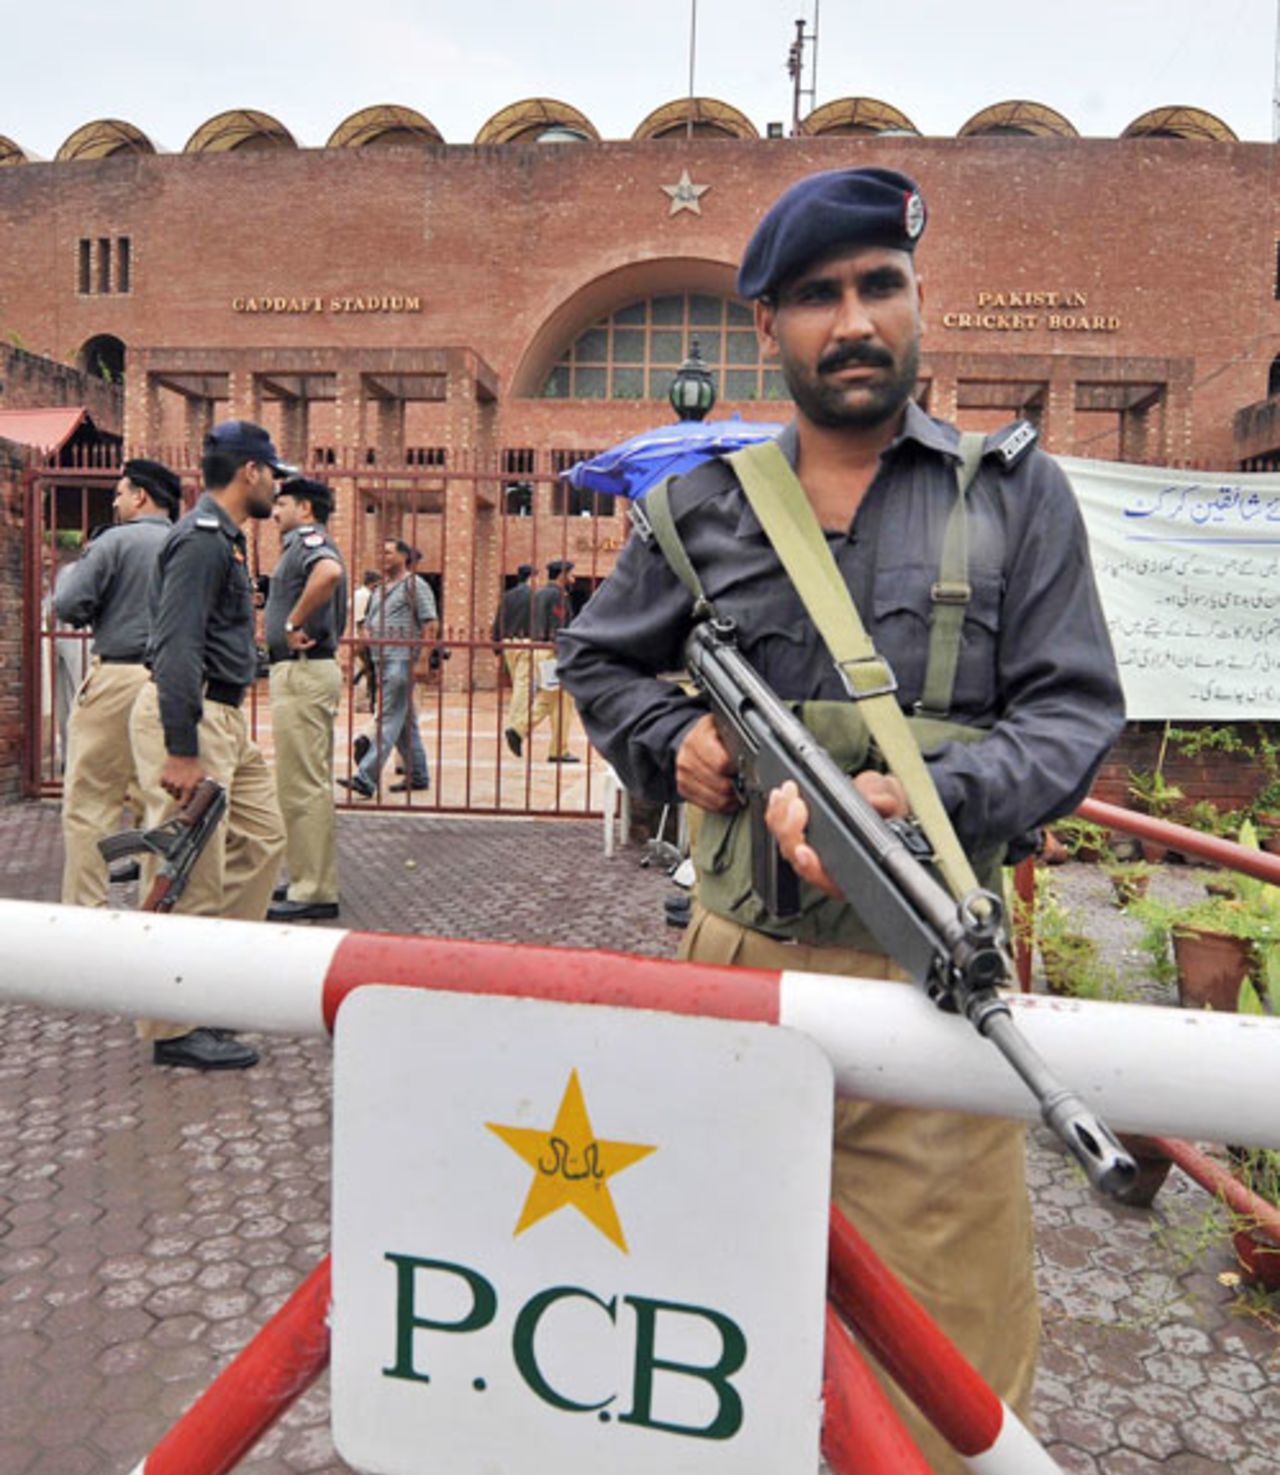 Heavy security at the Gaddafi Stadium during the ICC inspection of arrangements for the ICC Champions Trophy, Lahore, August 11, 2008